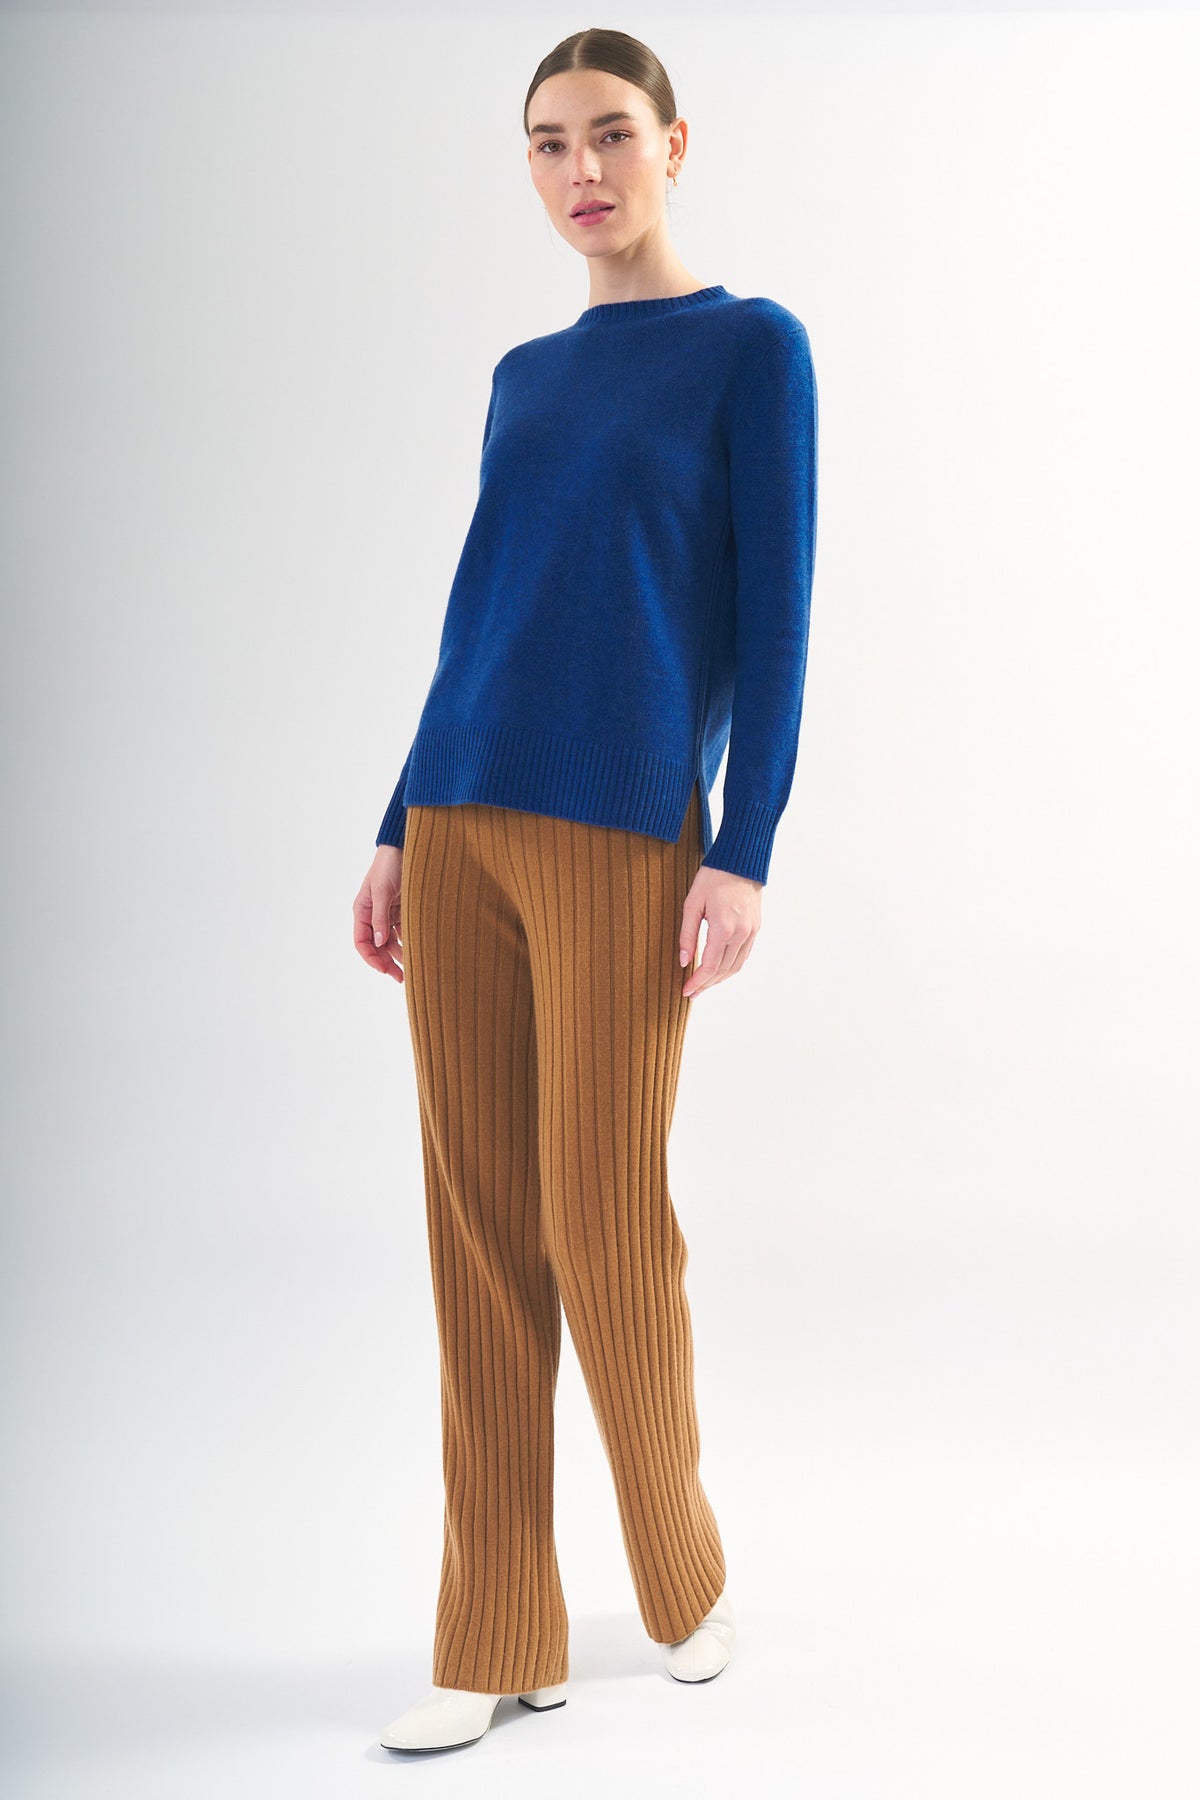 Ribbed Cashmere Crew - Royal Blue